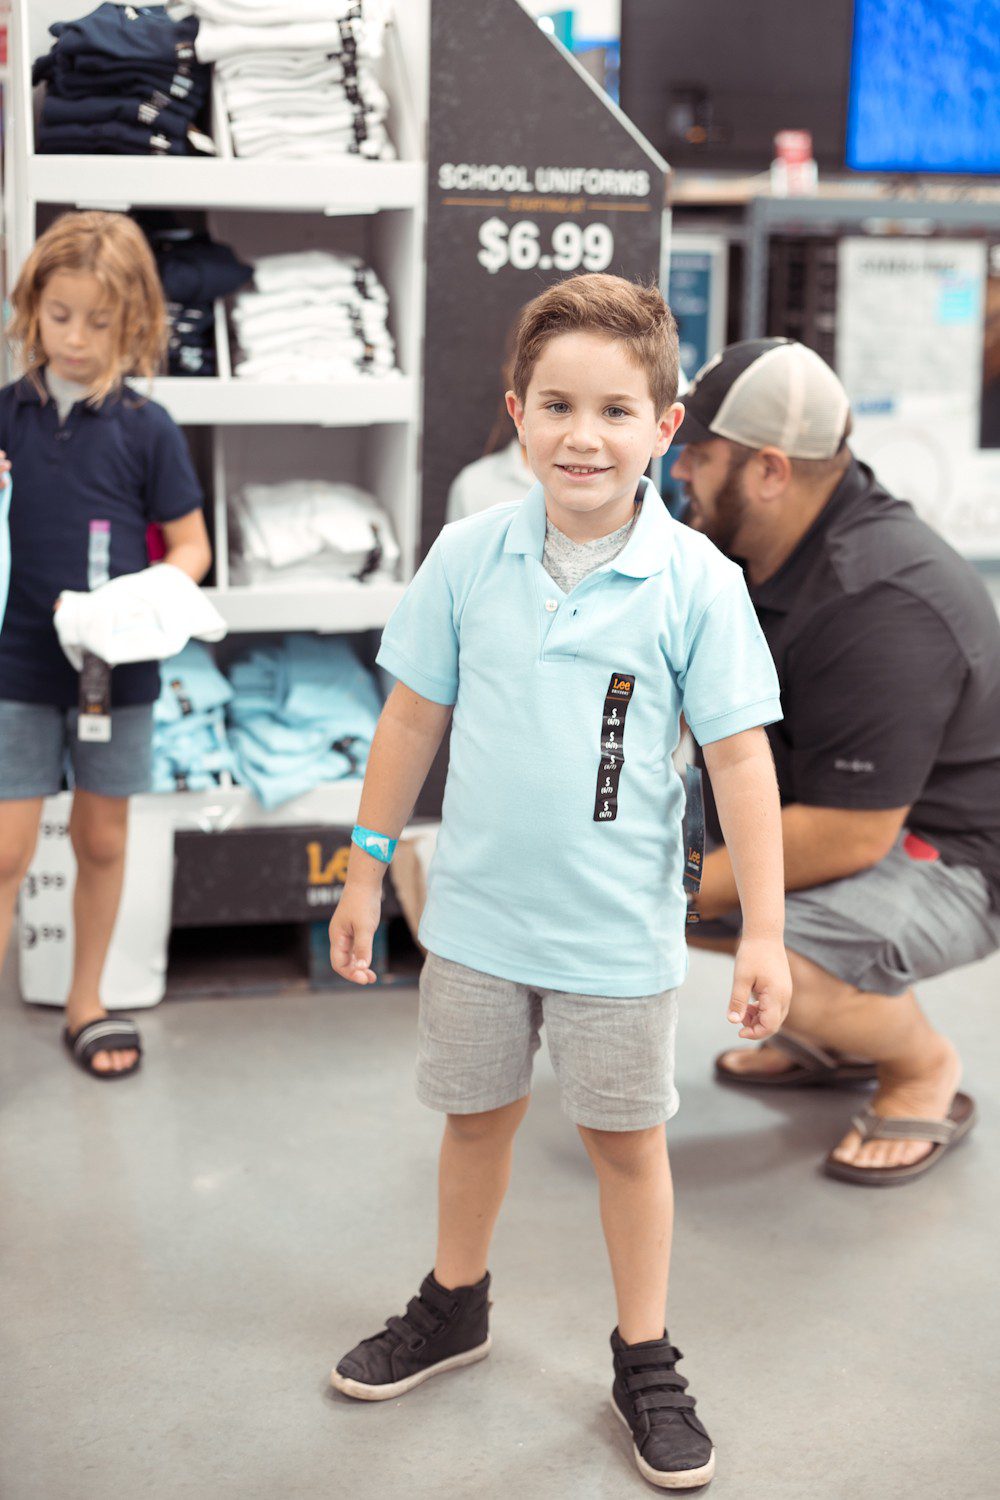 5 Sensational Strategies to Make Getting Ready for School Easy | How to Get Ready for School: 5 Sensational Strategies to Make Easy on your Family by popular Tampa life and style blog, Fresh Mommy: image of a dad helping his two young sons try on a blue Lee polo shirt.